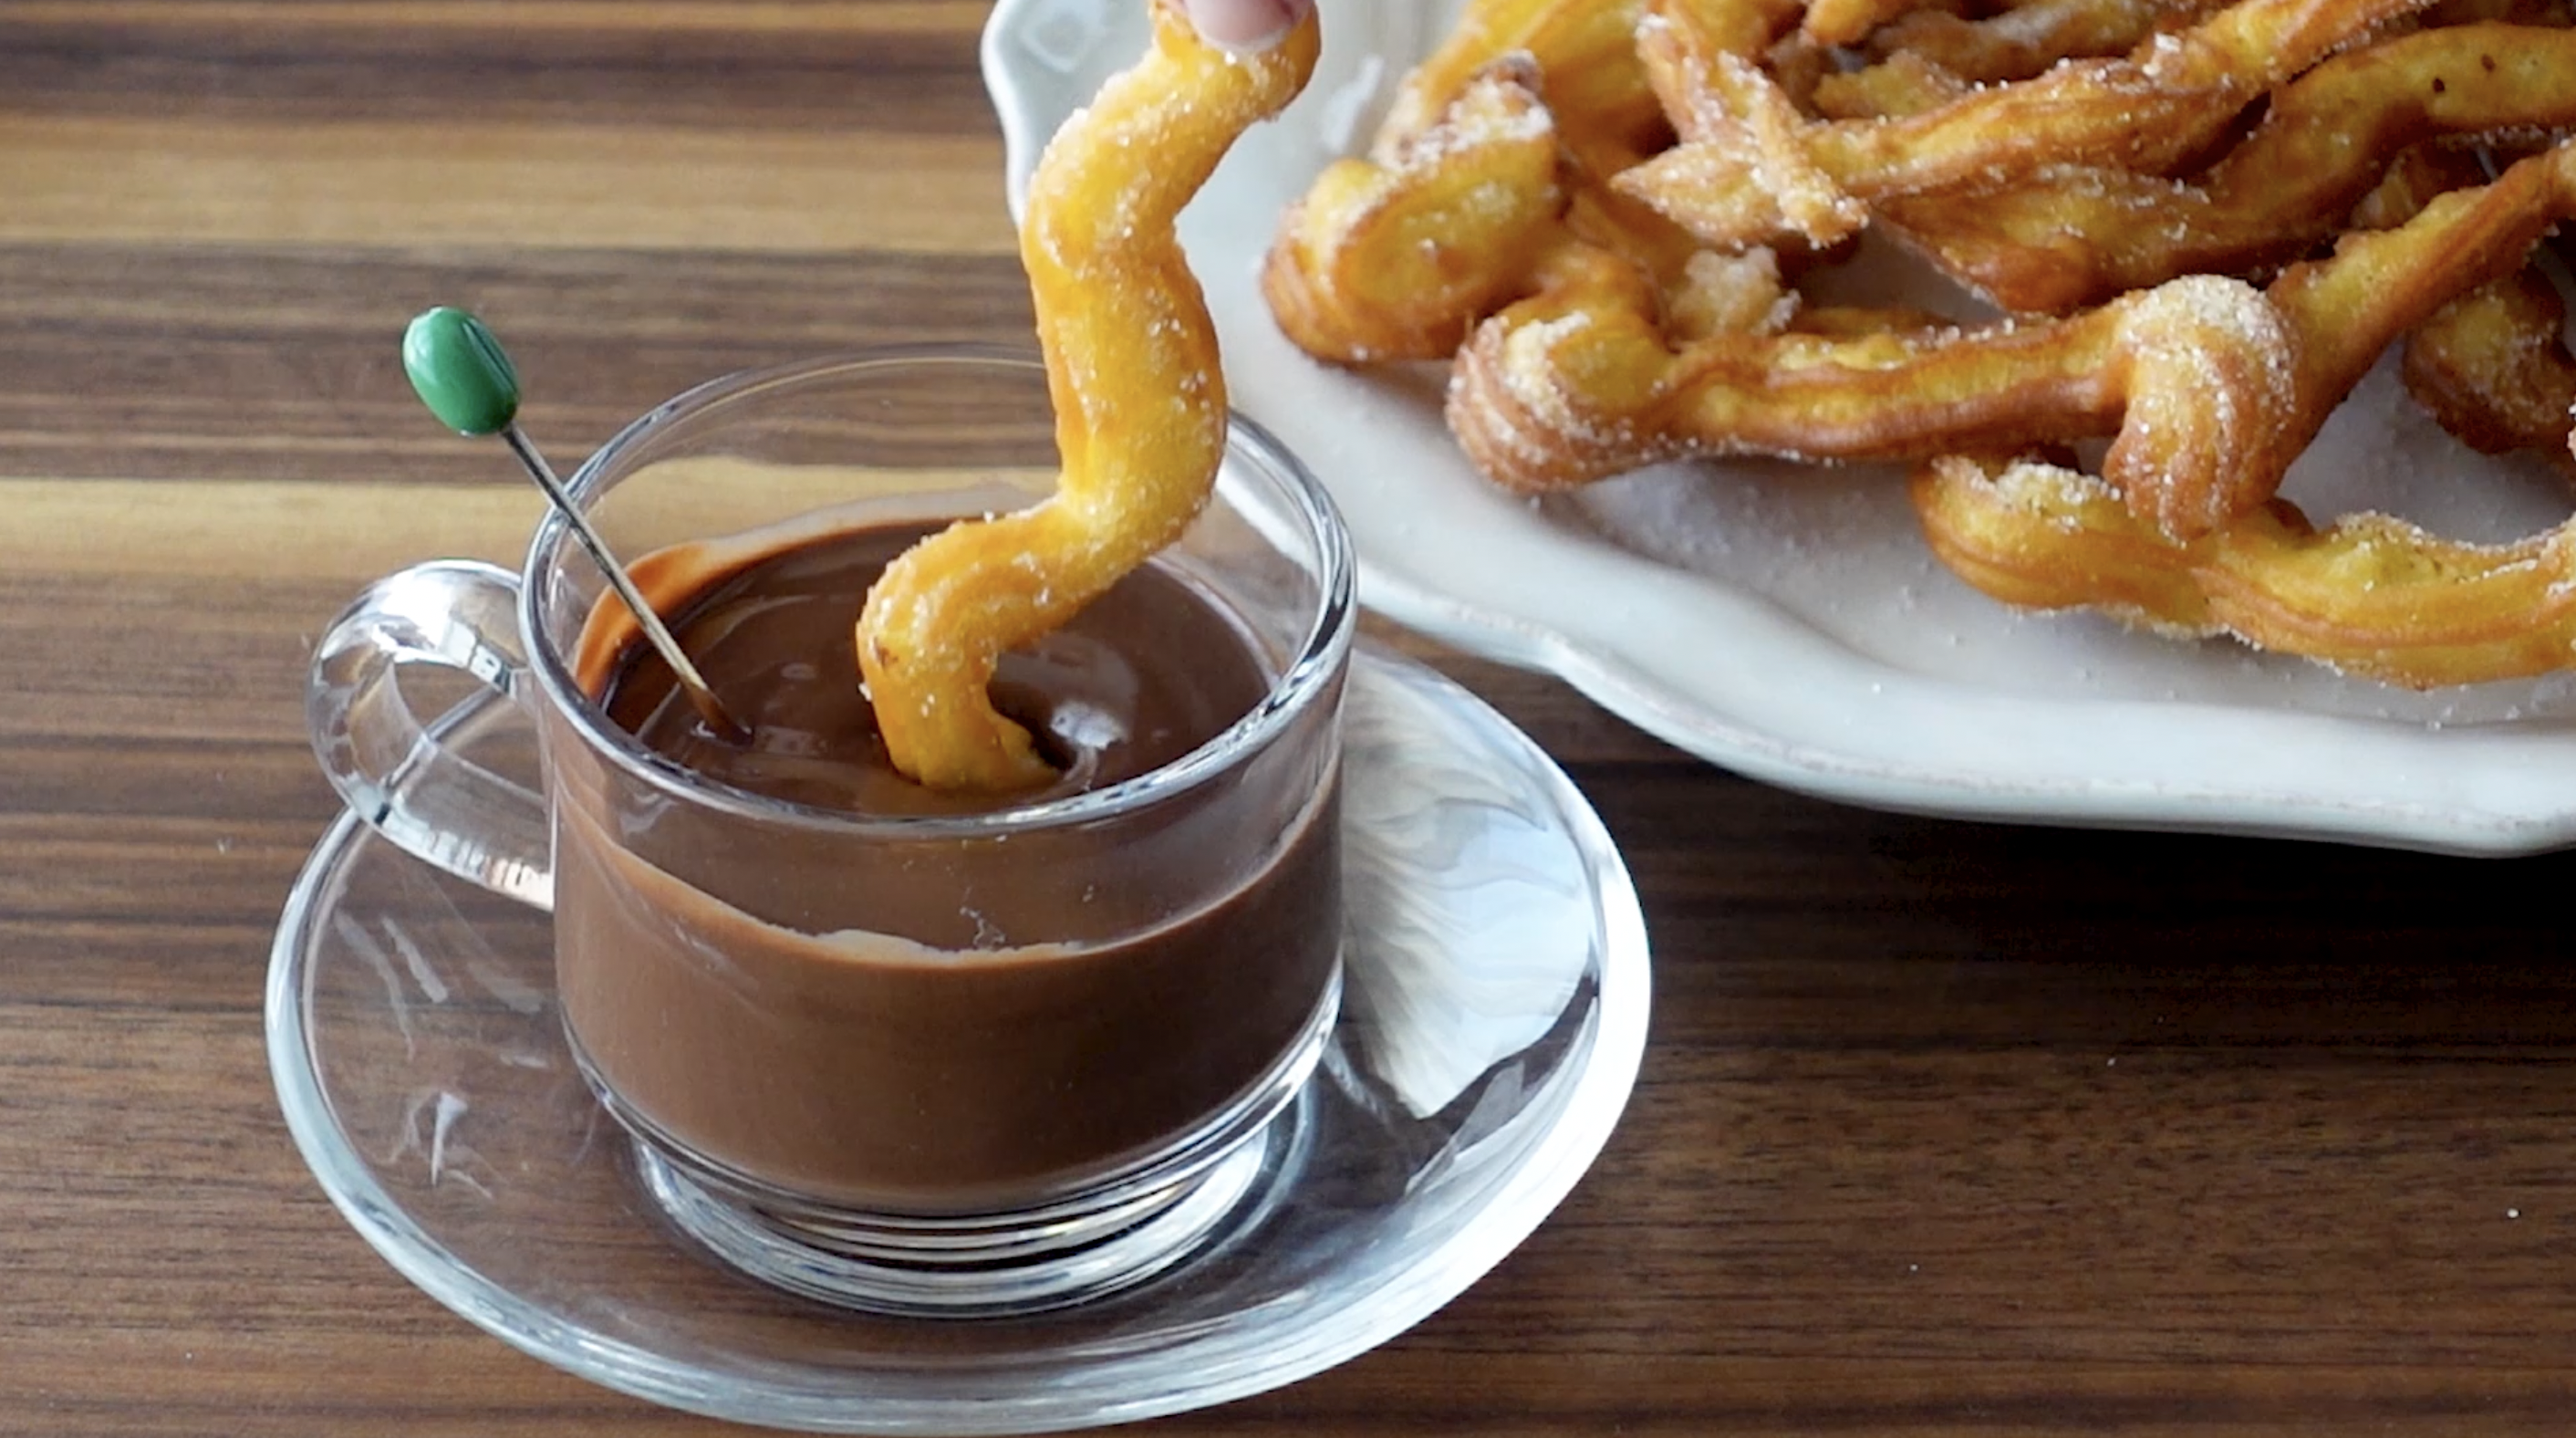 From America to Europe: Churros and Chocolate